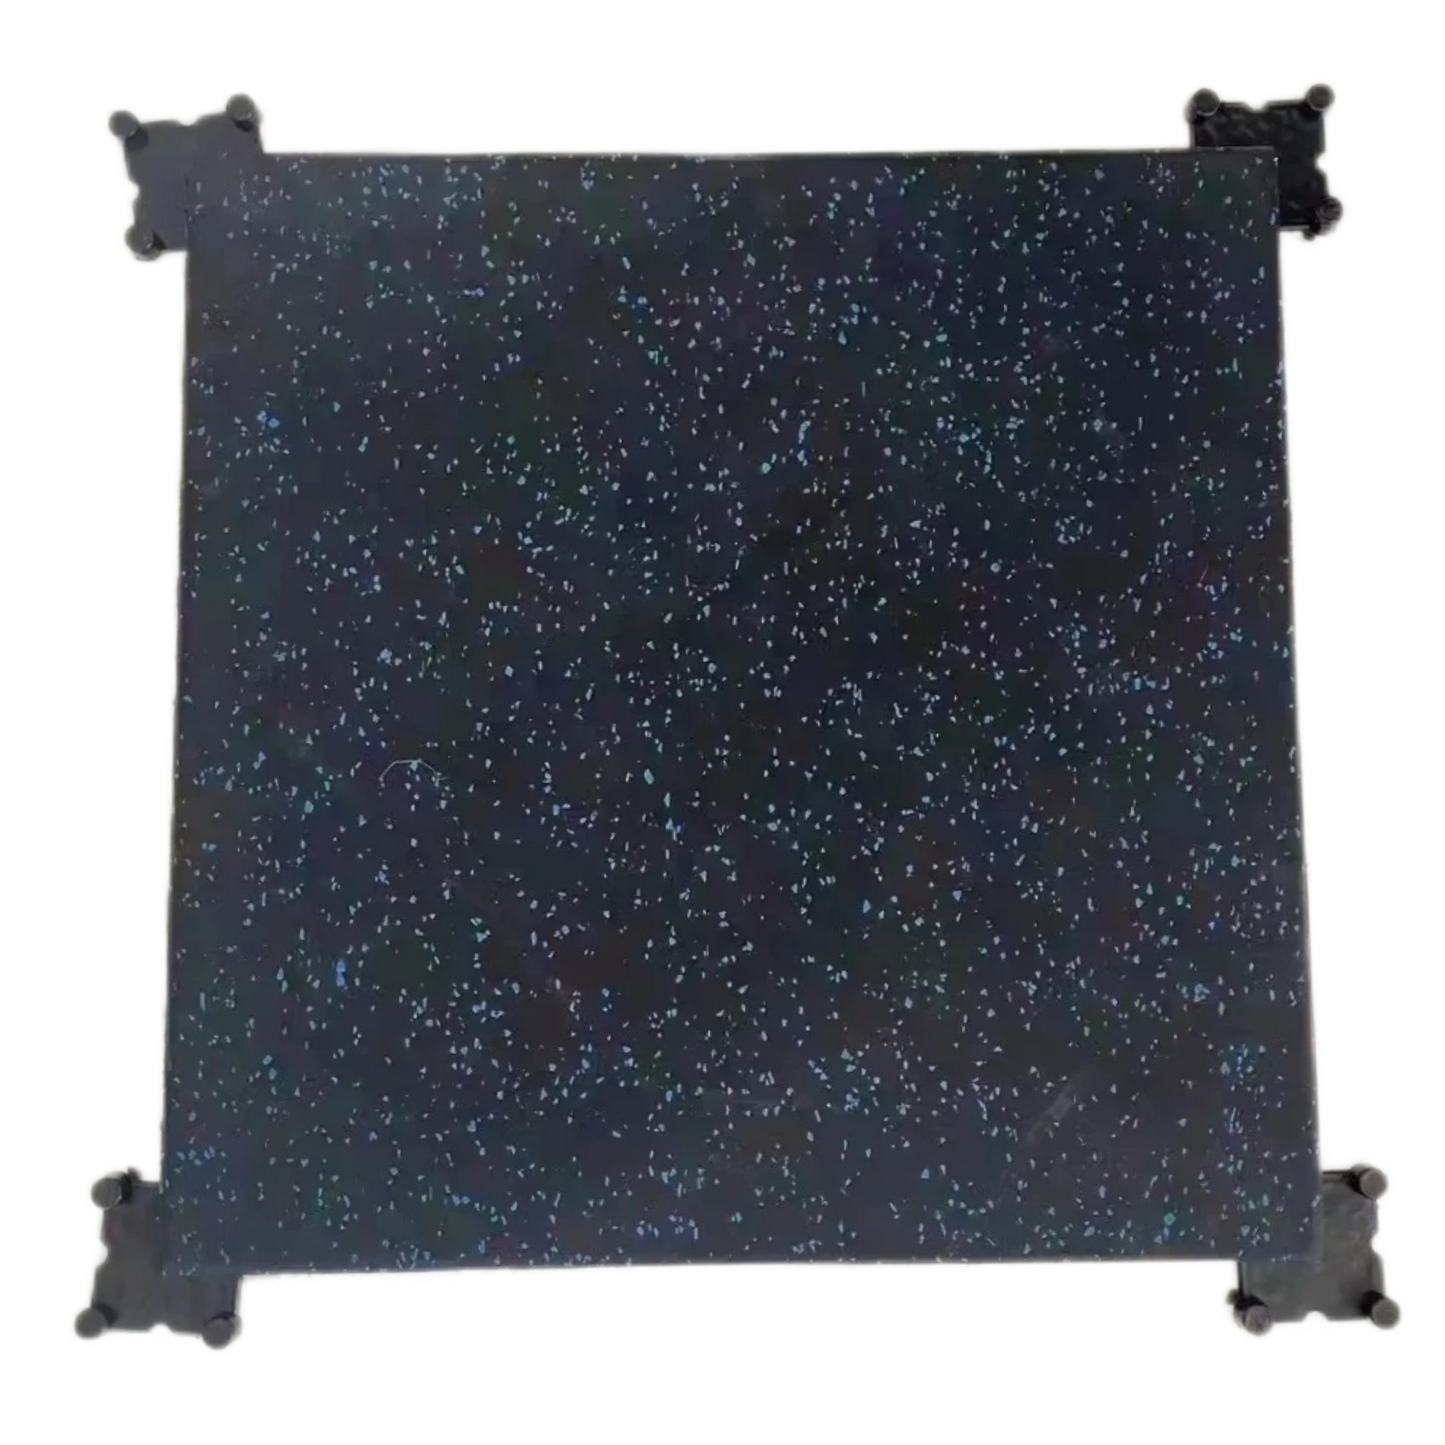 Rubber Mat 39" x 39" with plastic lock